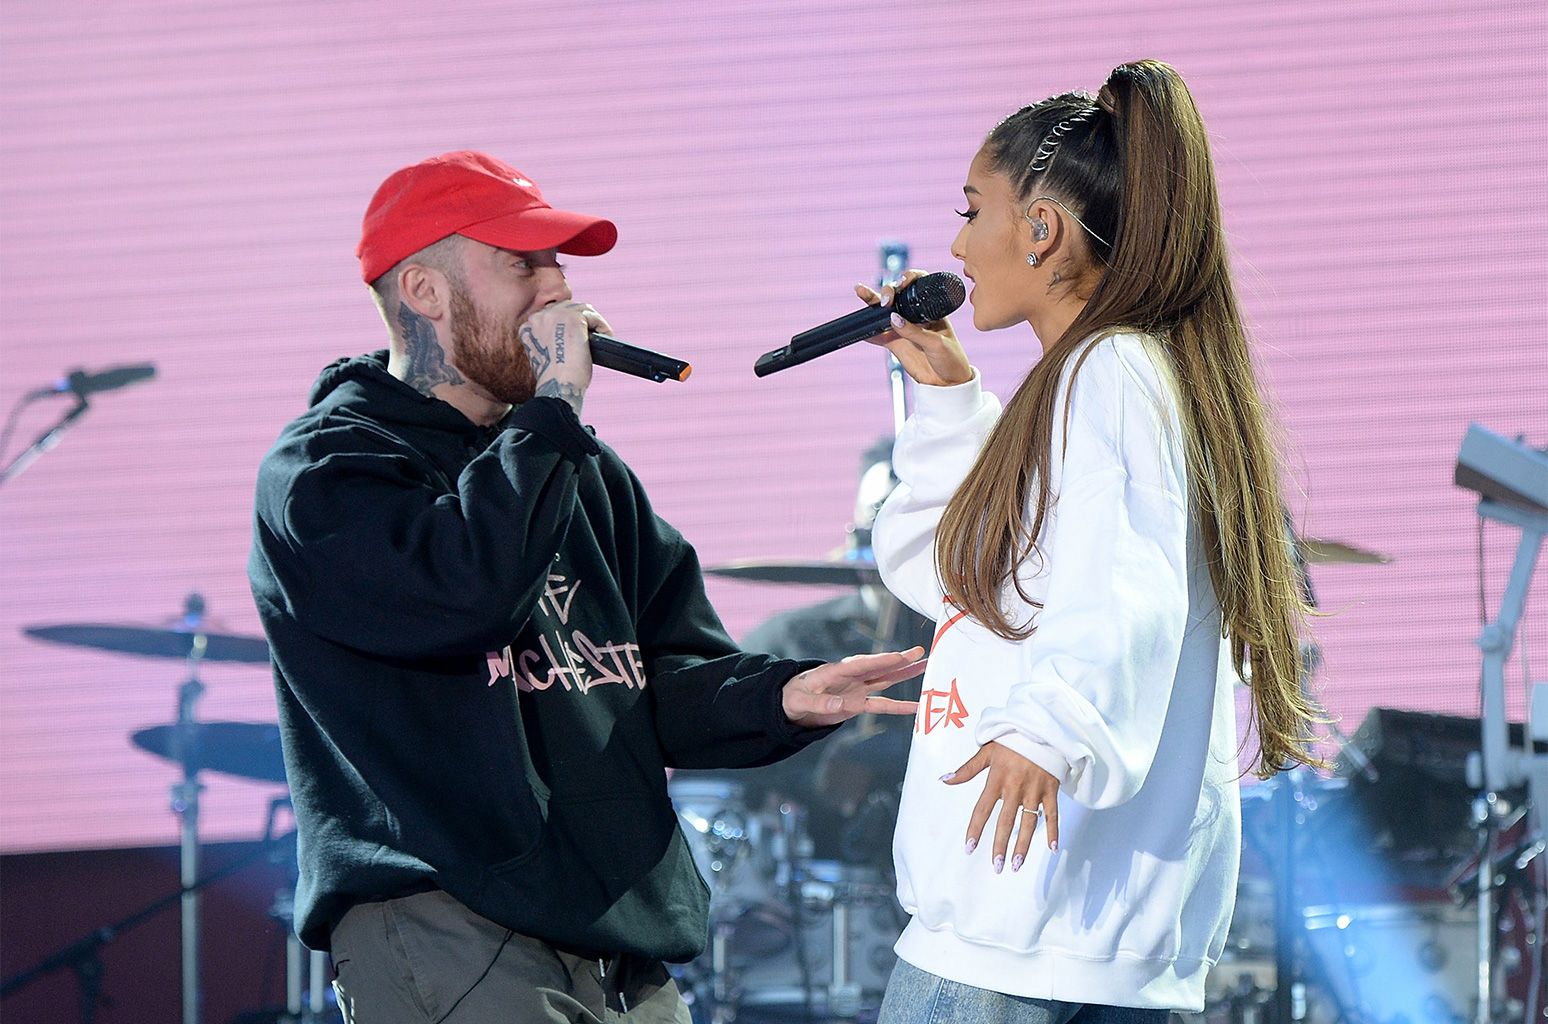 A toxic relationship and toxic publicity: Mac Miller’s death and Ariana Grande’s demonization